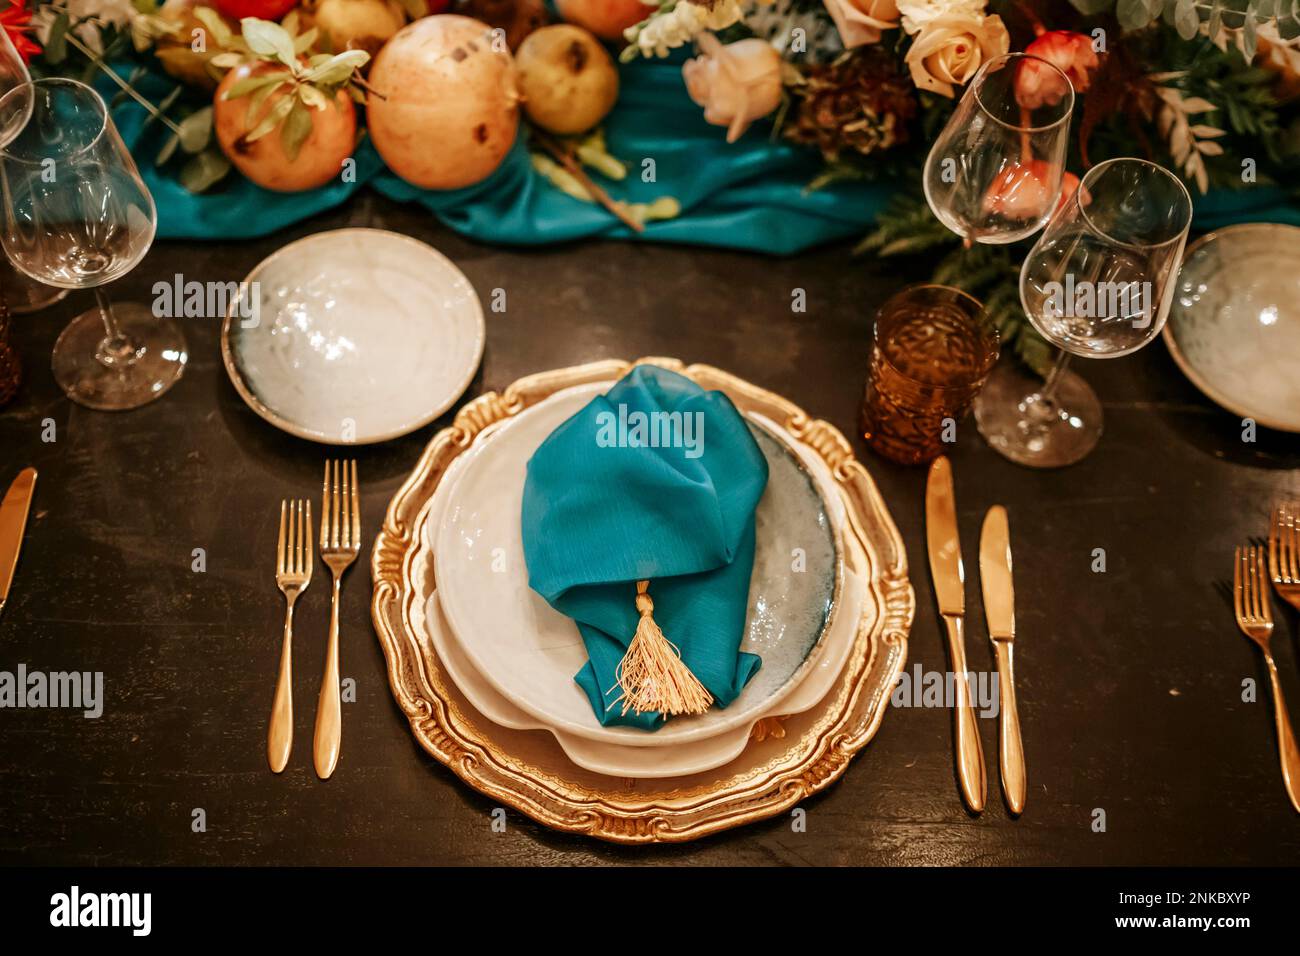 Exquisite, elegant golden and blue table set decoration in moody dark colors Stock Photo